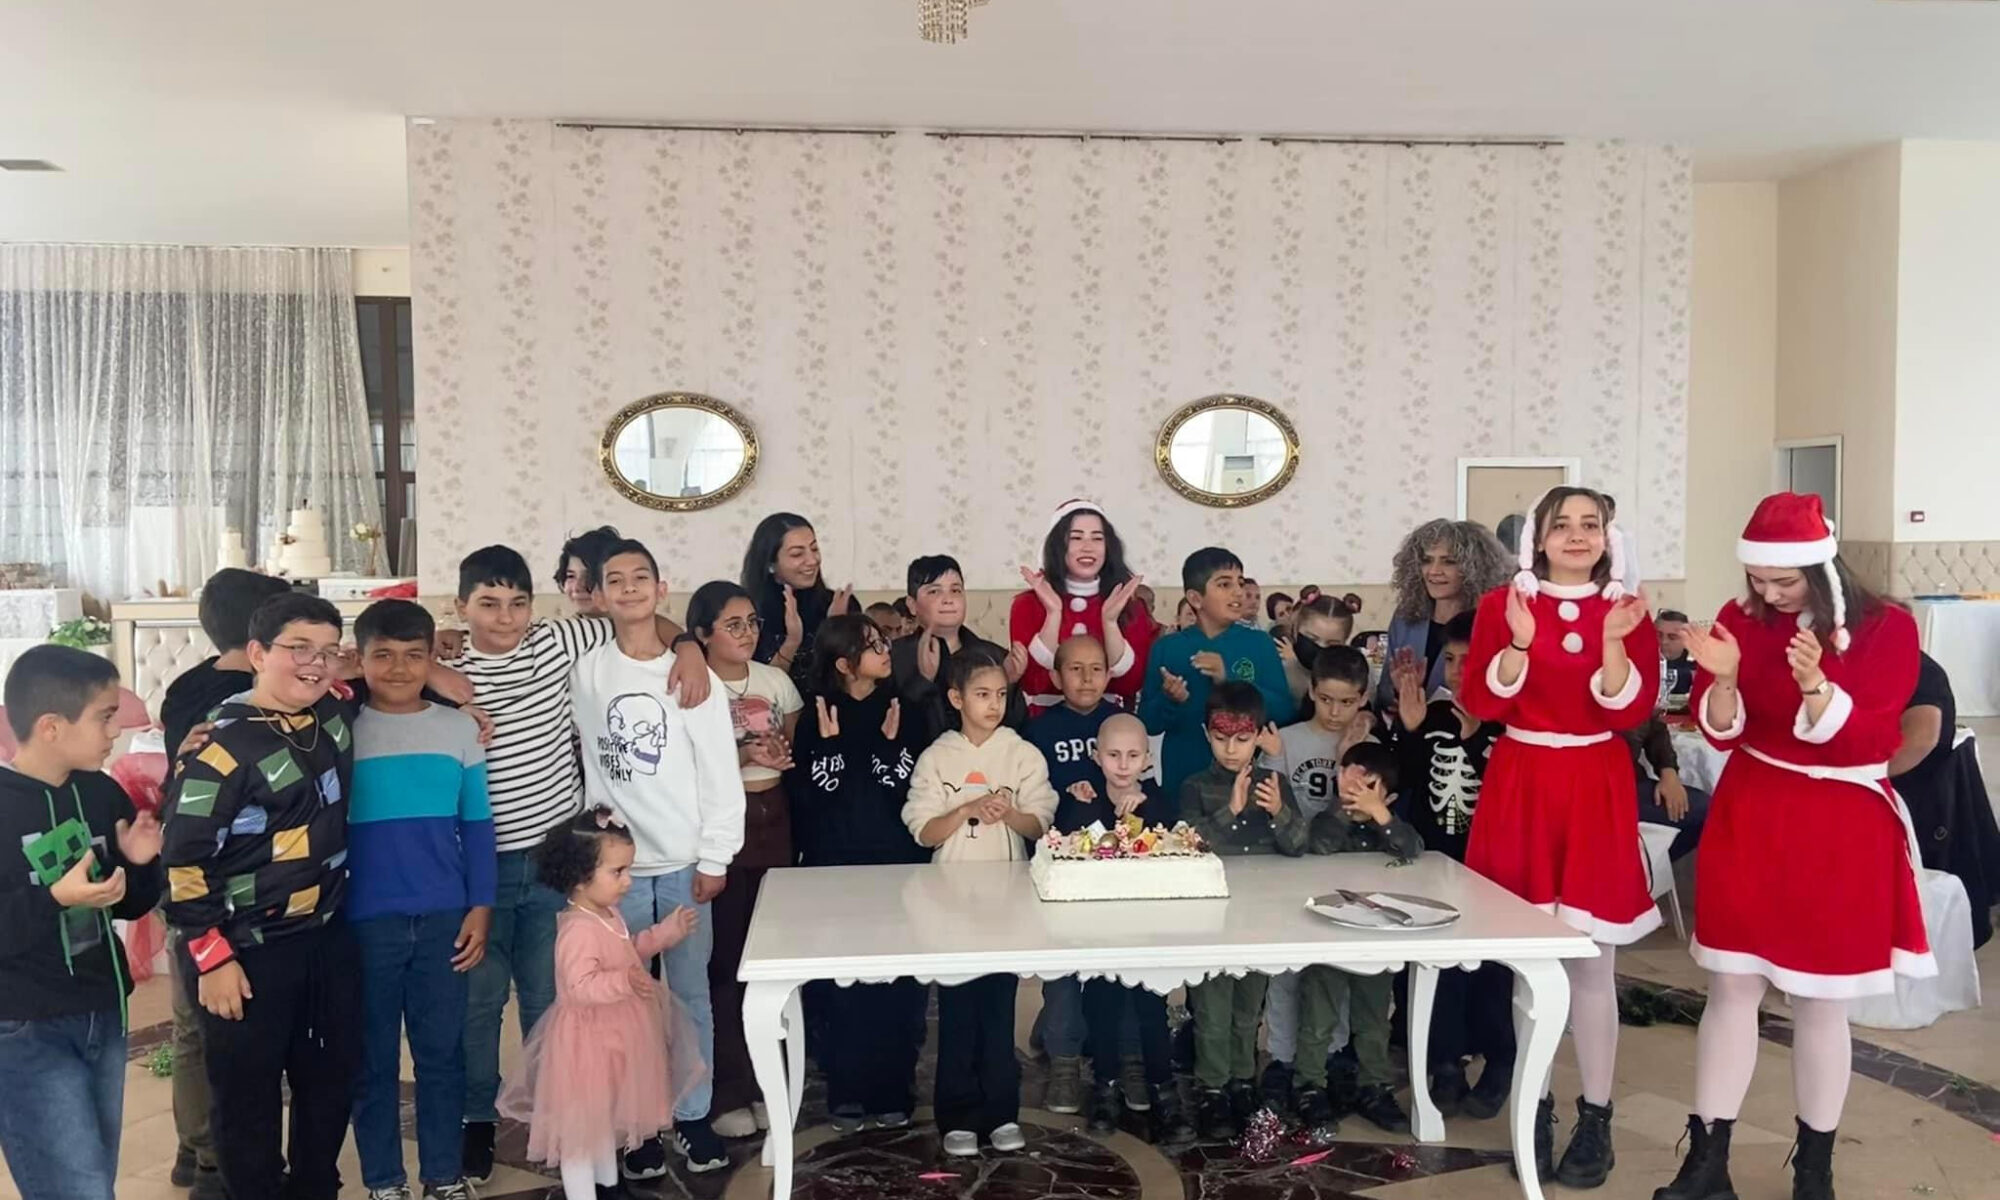 Cypriot children at Christmas